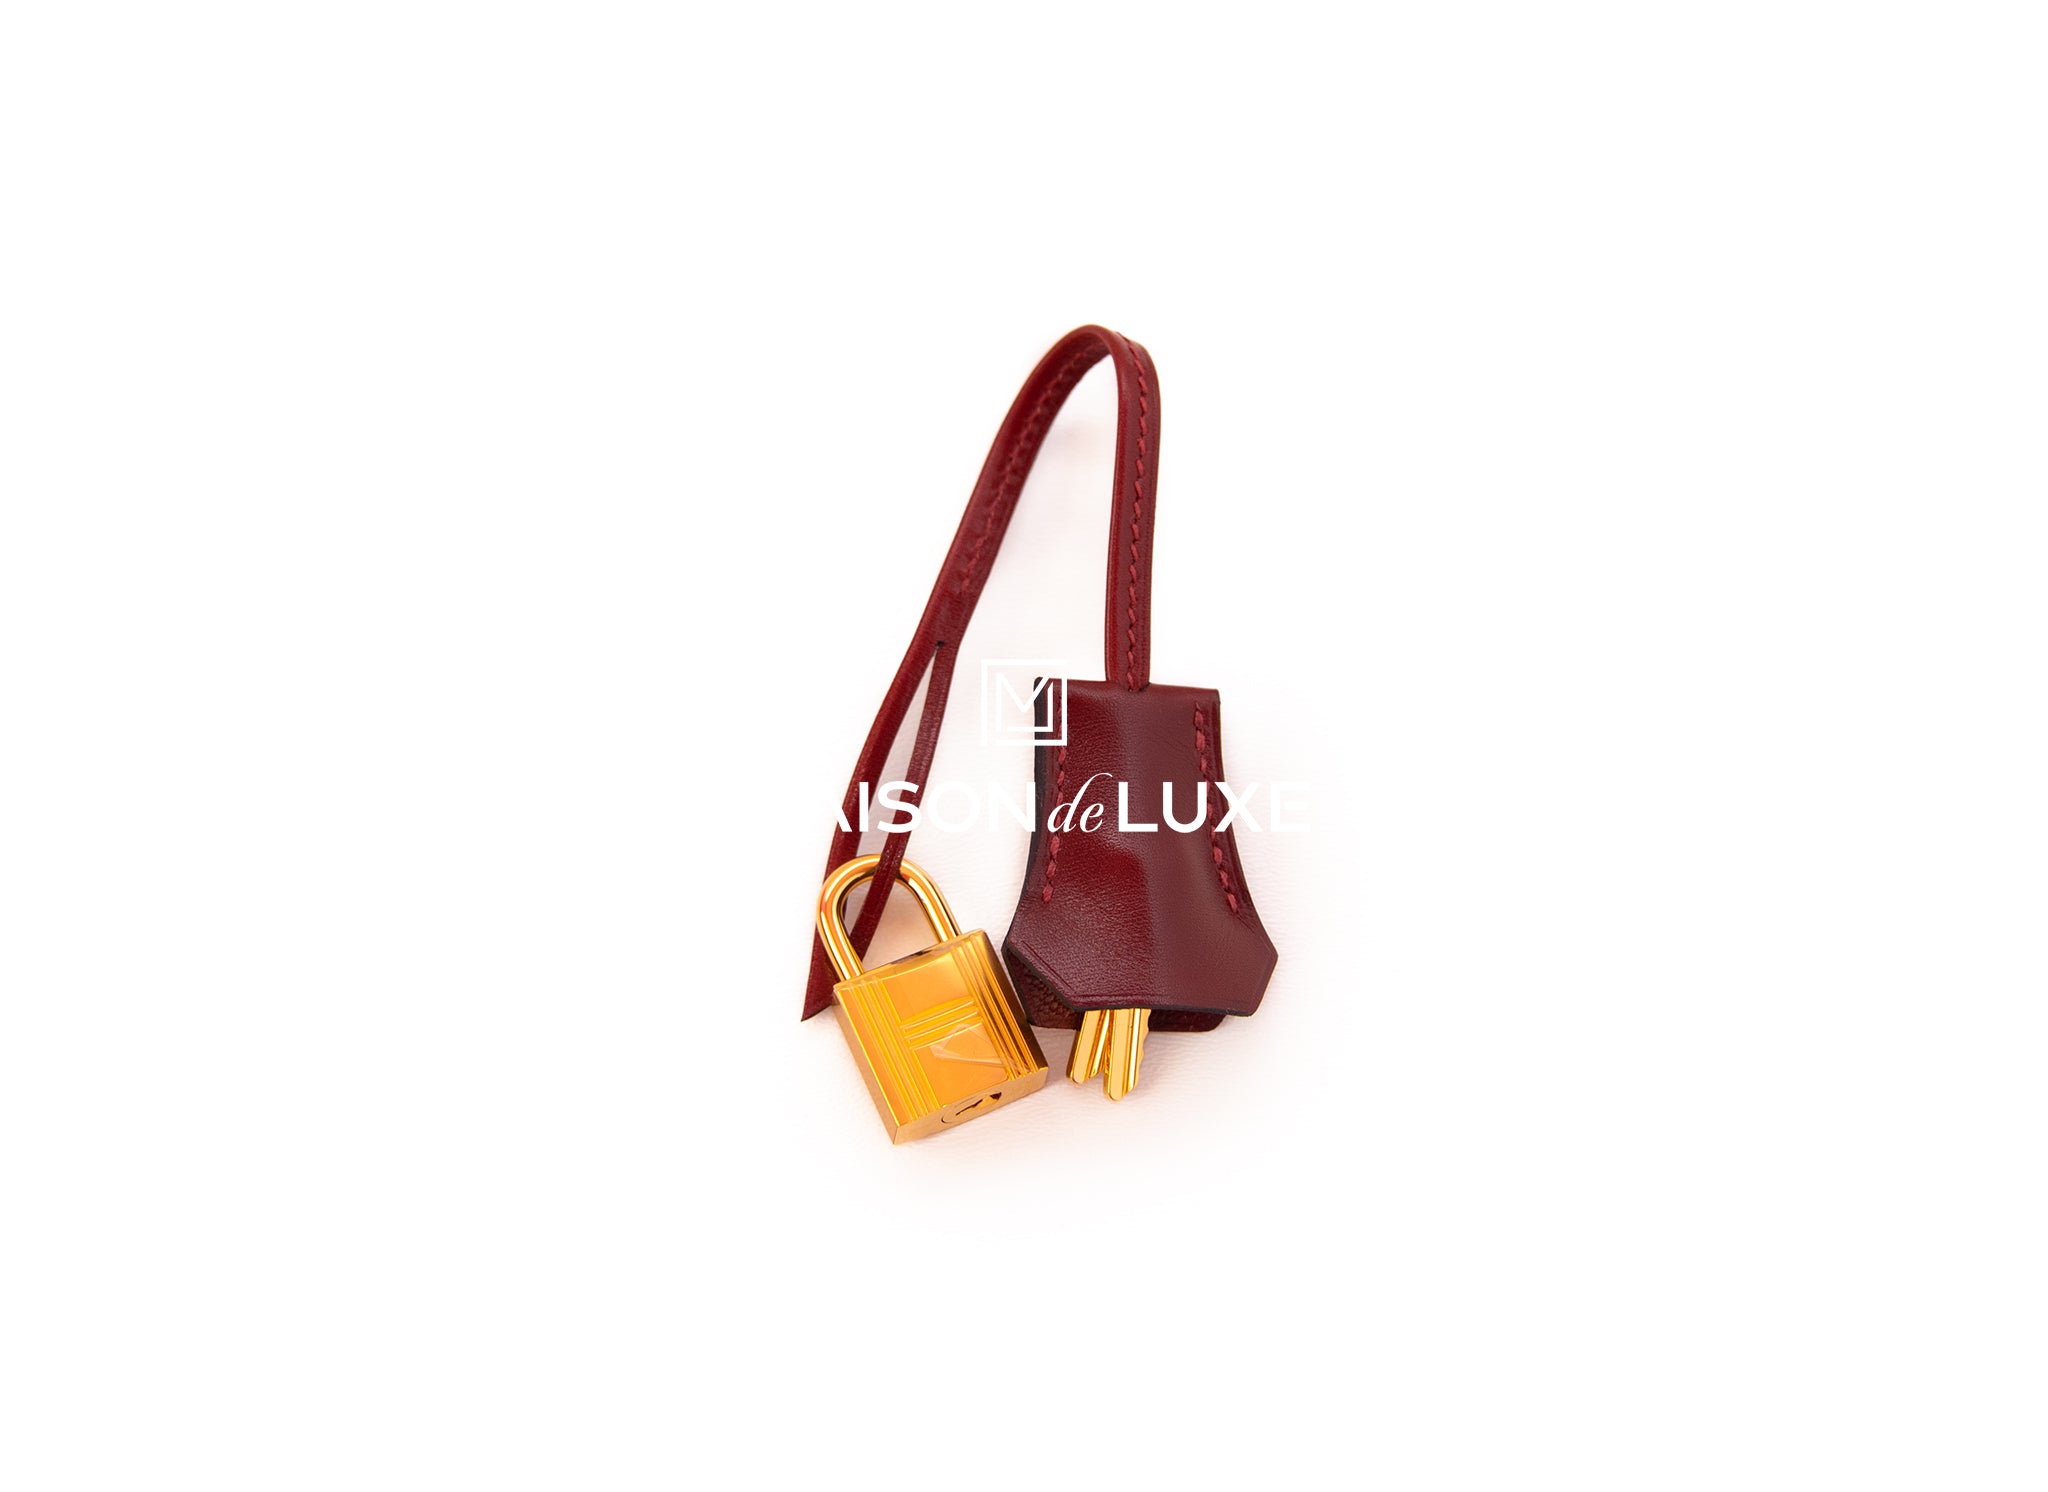 NEW HERMES ROUGE H RED BIRKIN 25 BOX LEATHER SELLIER GHW BAG